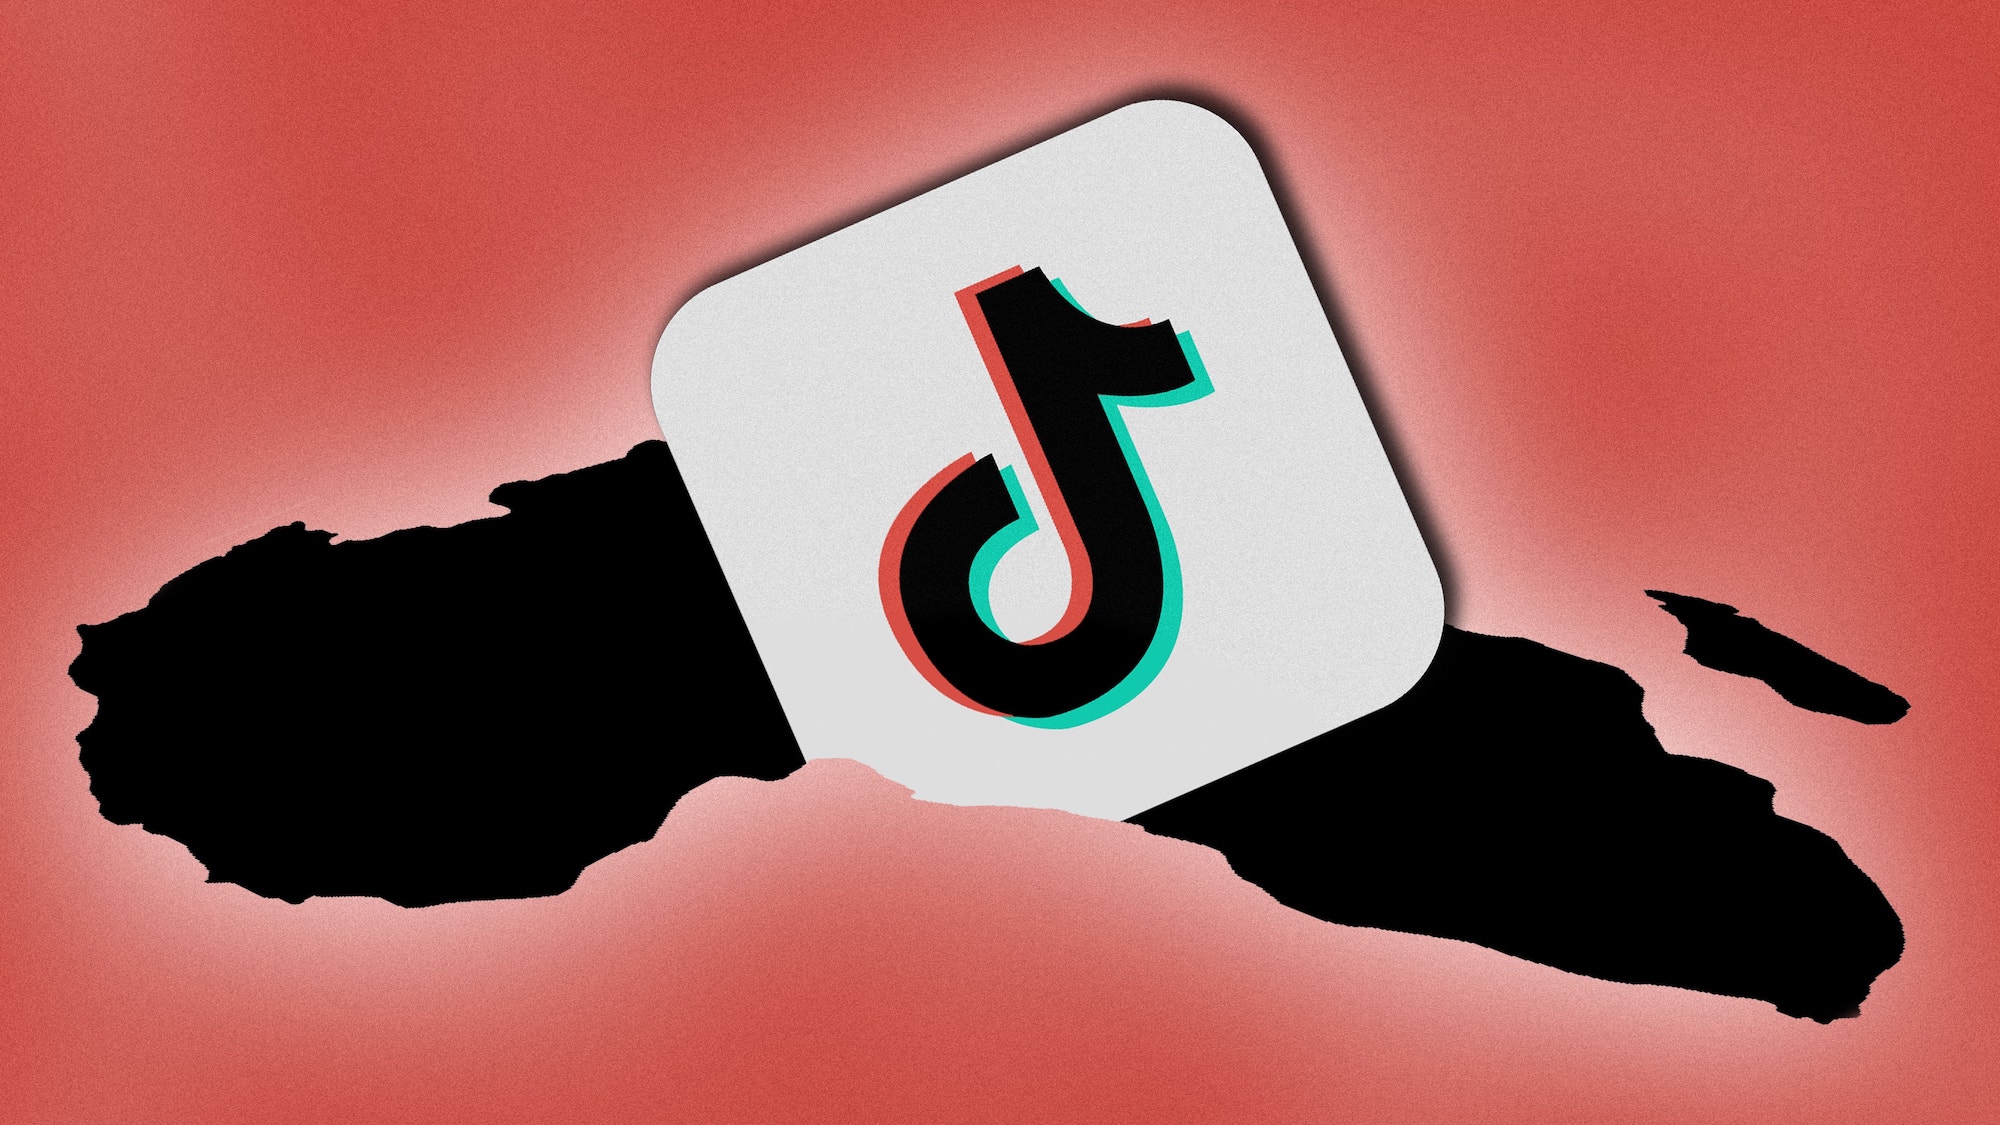 TikTok Porn: Where Social Media Meets Adult Entertainment - Recommendations for users engaging with adult content on TikTok